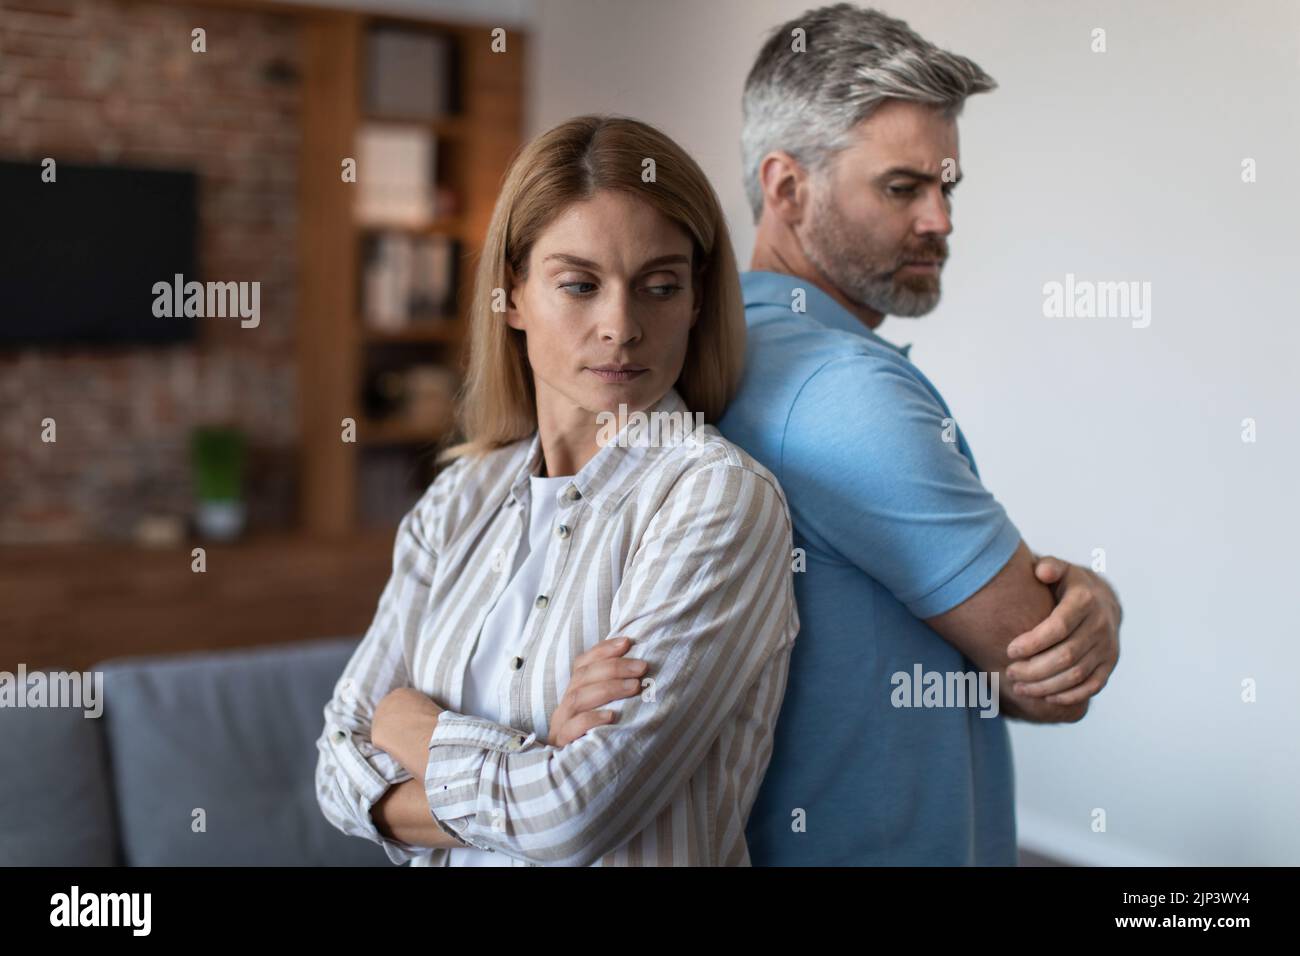 Offended upset adult european husband ignores wife, man and woman stand back to back in room interior Stock Photo